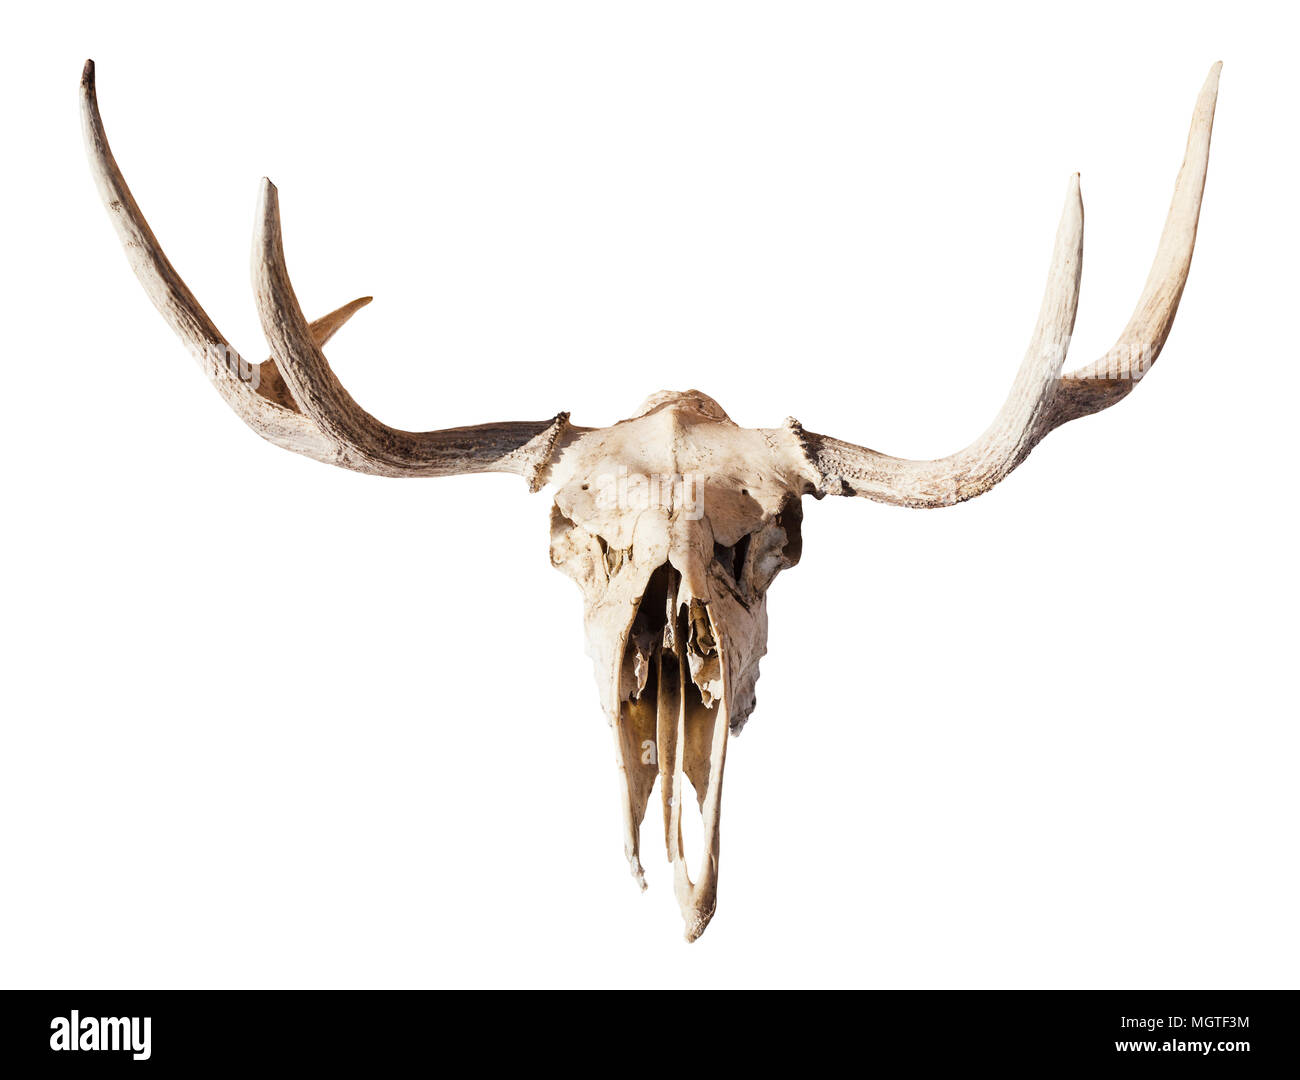 front view of natural skull of young moose animal isolated on white background from Smolensk region of Russia Stock Photo